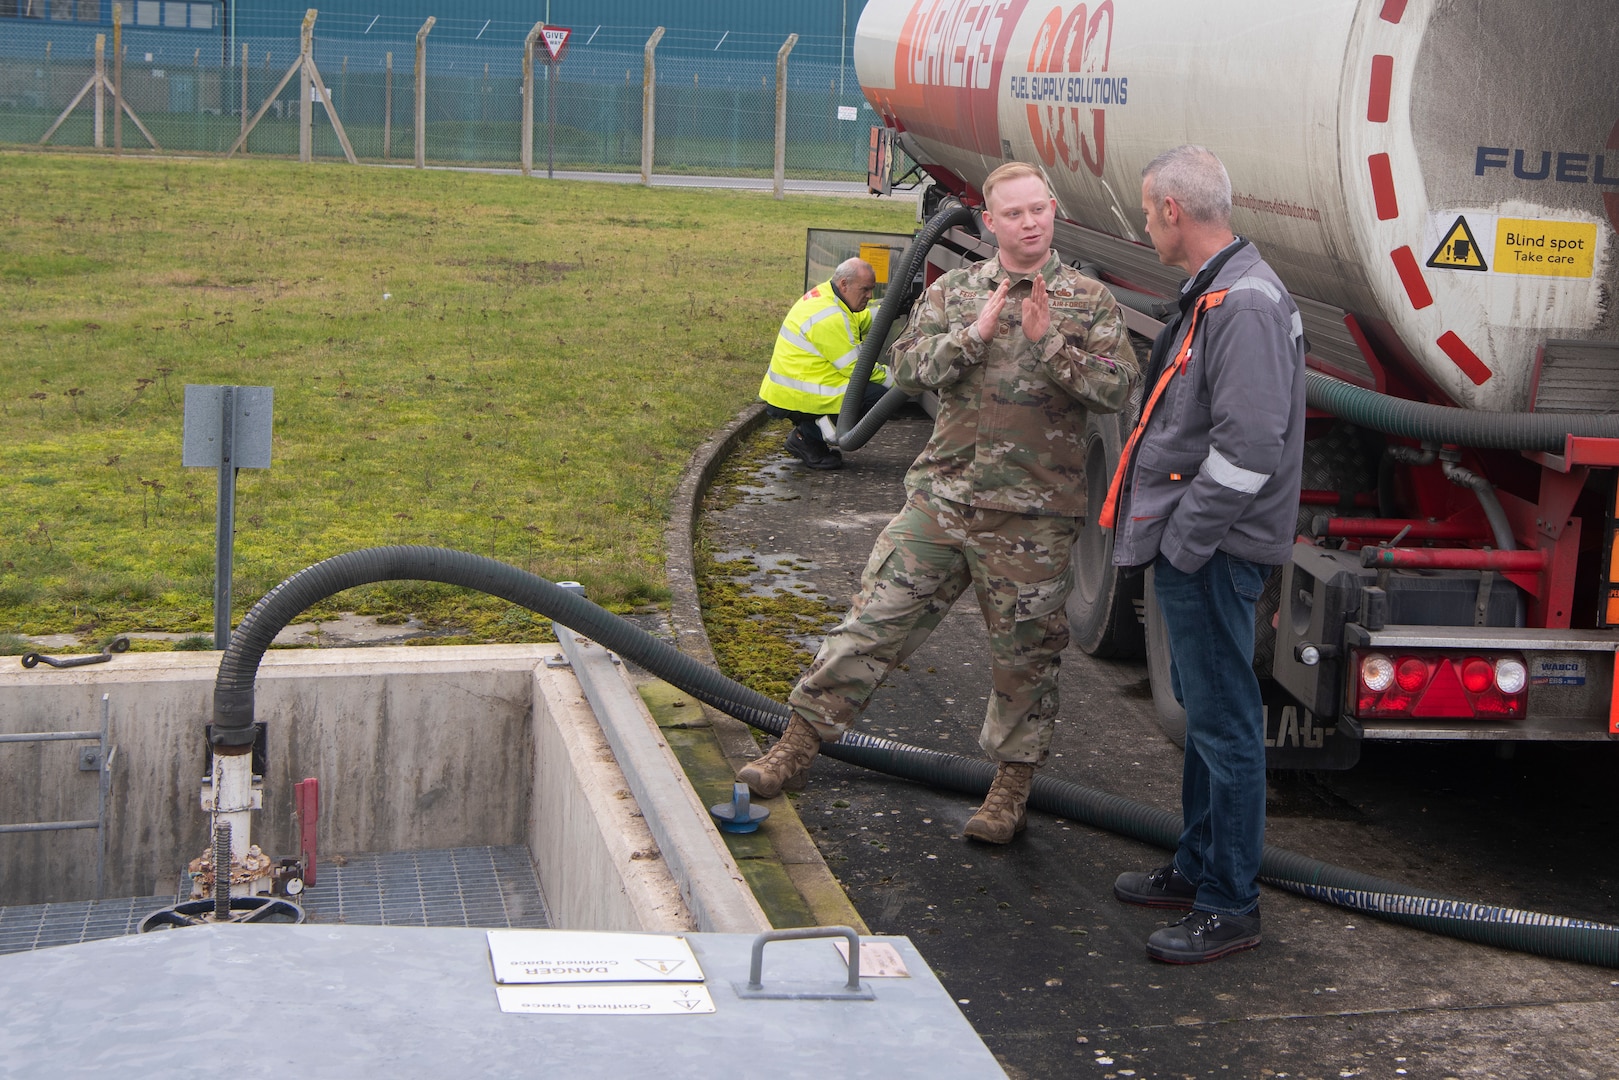 Master Sgt. Joseph Feiss, 100th Logistics Readiness Squadron noncommissioned officer in charge of fuels environmental safety office, and Mike Wilson, Defense Logistics Agency quality assurance representative, discuss the fuel transfer process Jan. 27, 2020, at RAF Mildenhall, England. The 100th LRS fuel management flight proved their mission readiness by obtaining fuel through a tanker truck instead of underground pipes. (U.S. Air Force photo by Airman 1st Class Joseph Barron)